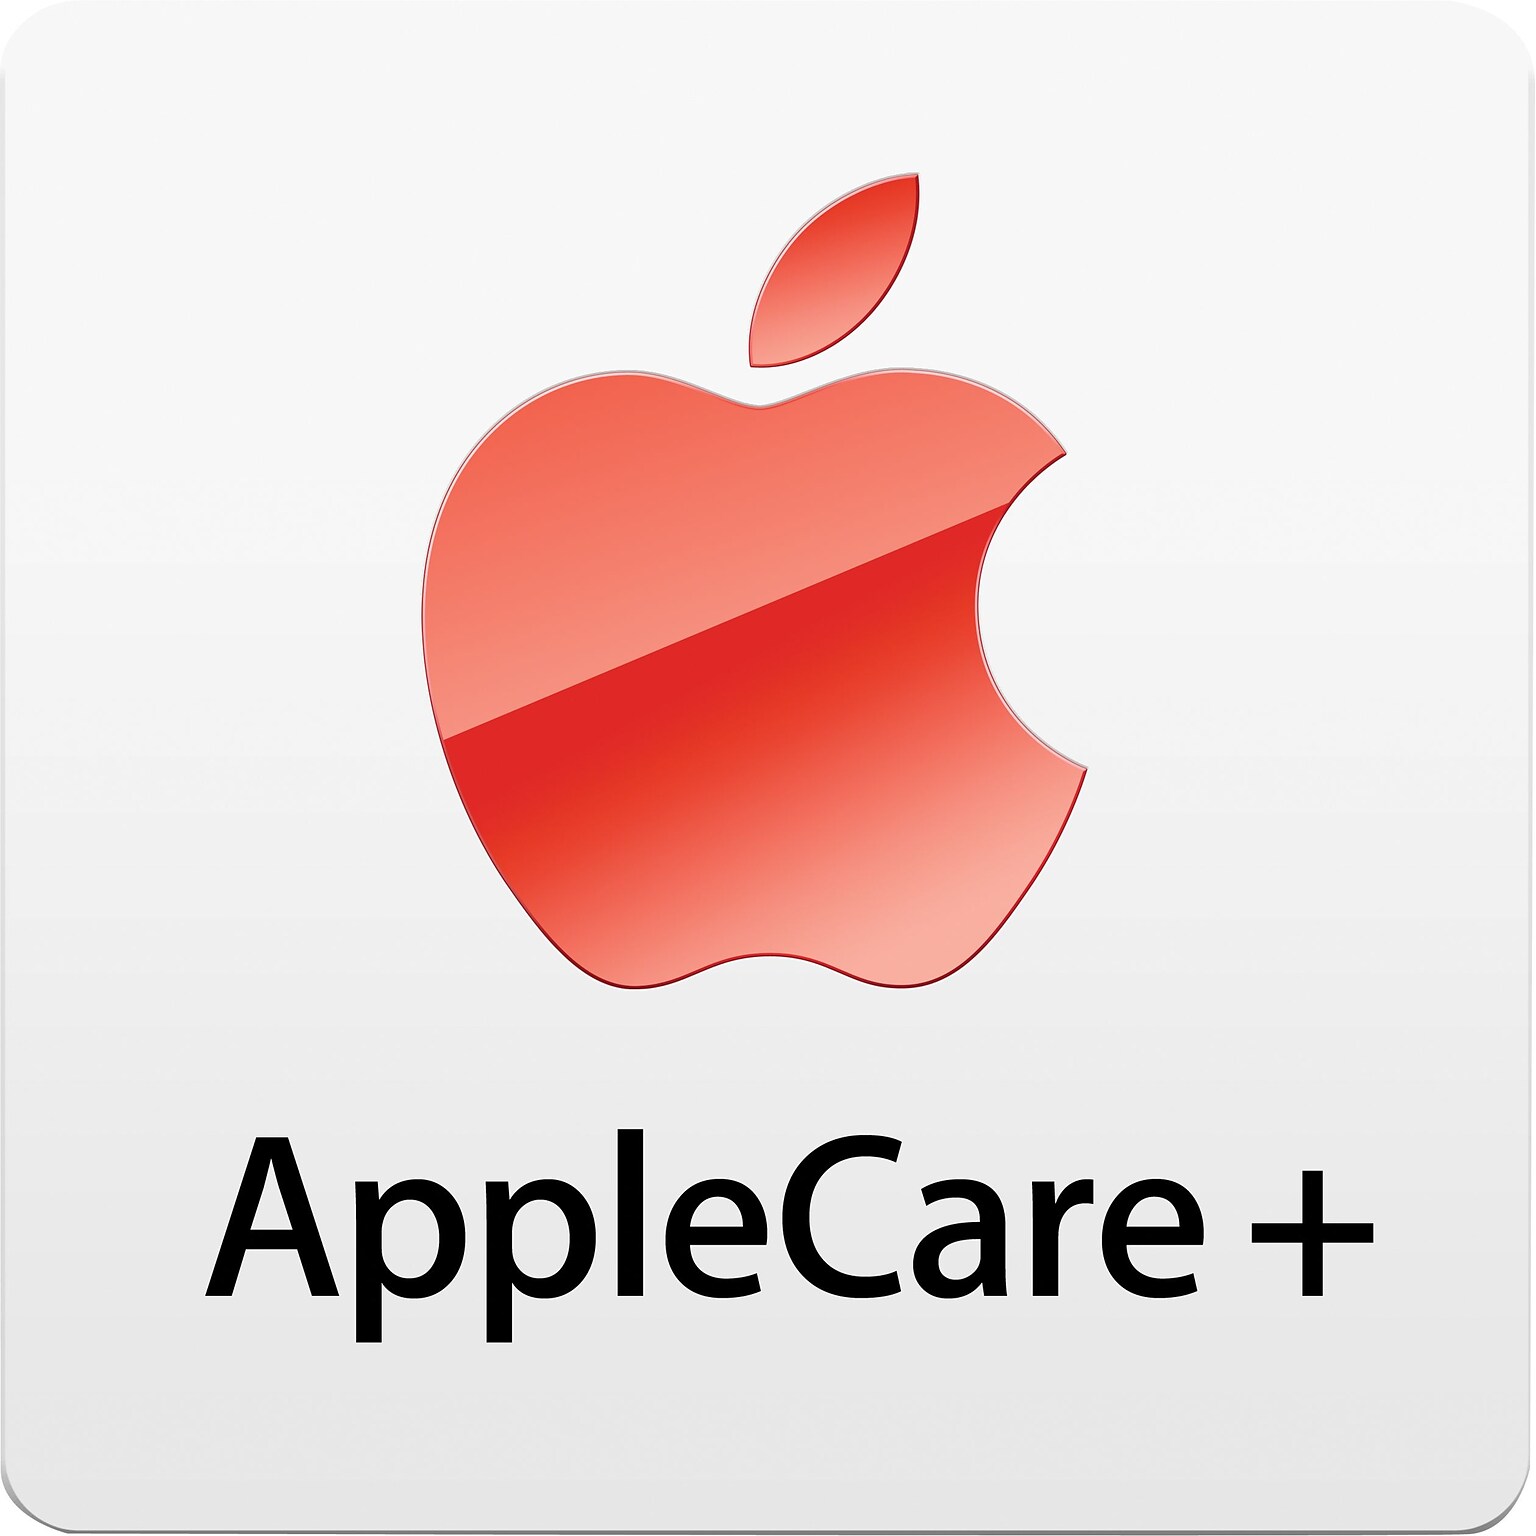 AppleCare+ Provided by ACSC Inc. (for iPad mini with Wifi 64GB, White)